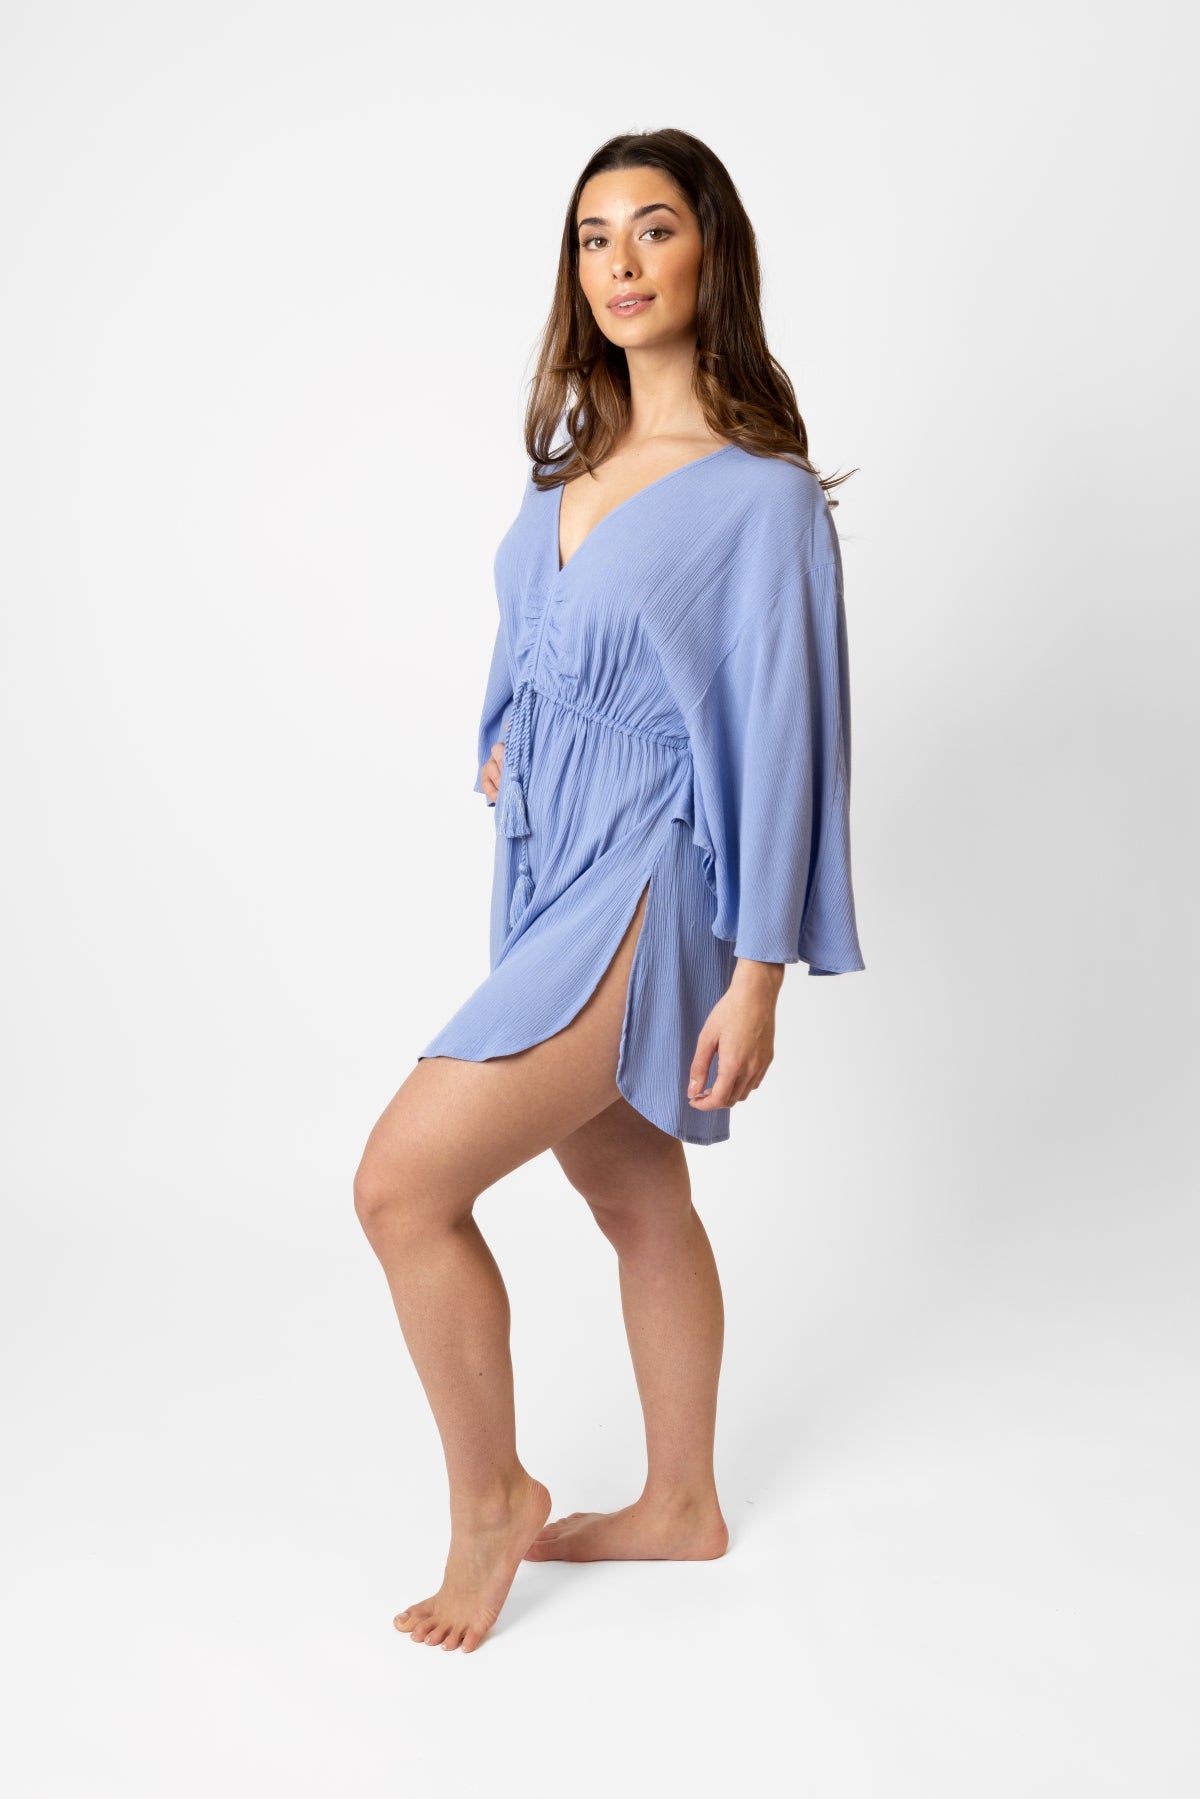 Koy resort miami cinched front beachy batwing mini dress. Brunette model facing side, wearing Bahama Blue Miami Cinched Front Dress. Features ruched center front with tassel pull and gold trim, adjustable straps, side slits, and butterfly batwing style sleeves. Light and breezy fabric, perfect for making a statement in South Beach. Koy Resort affordable vacation, cruise, and resort-wear.